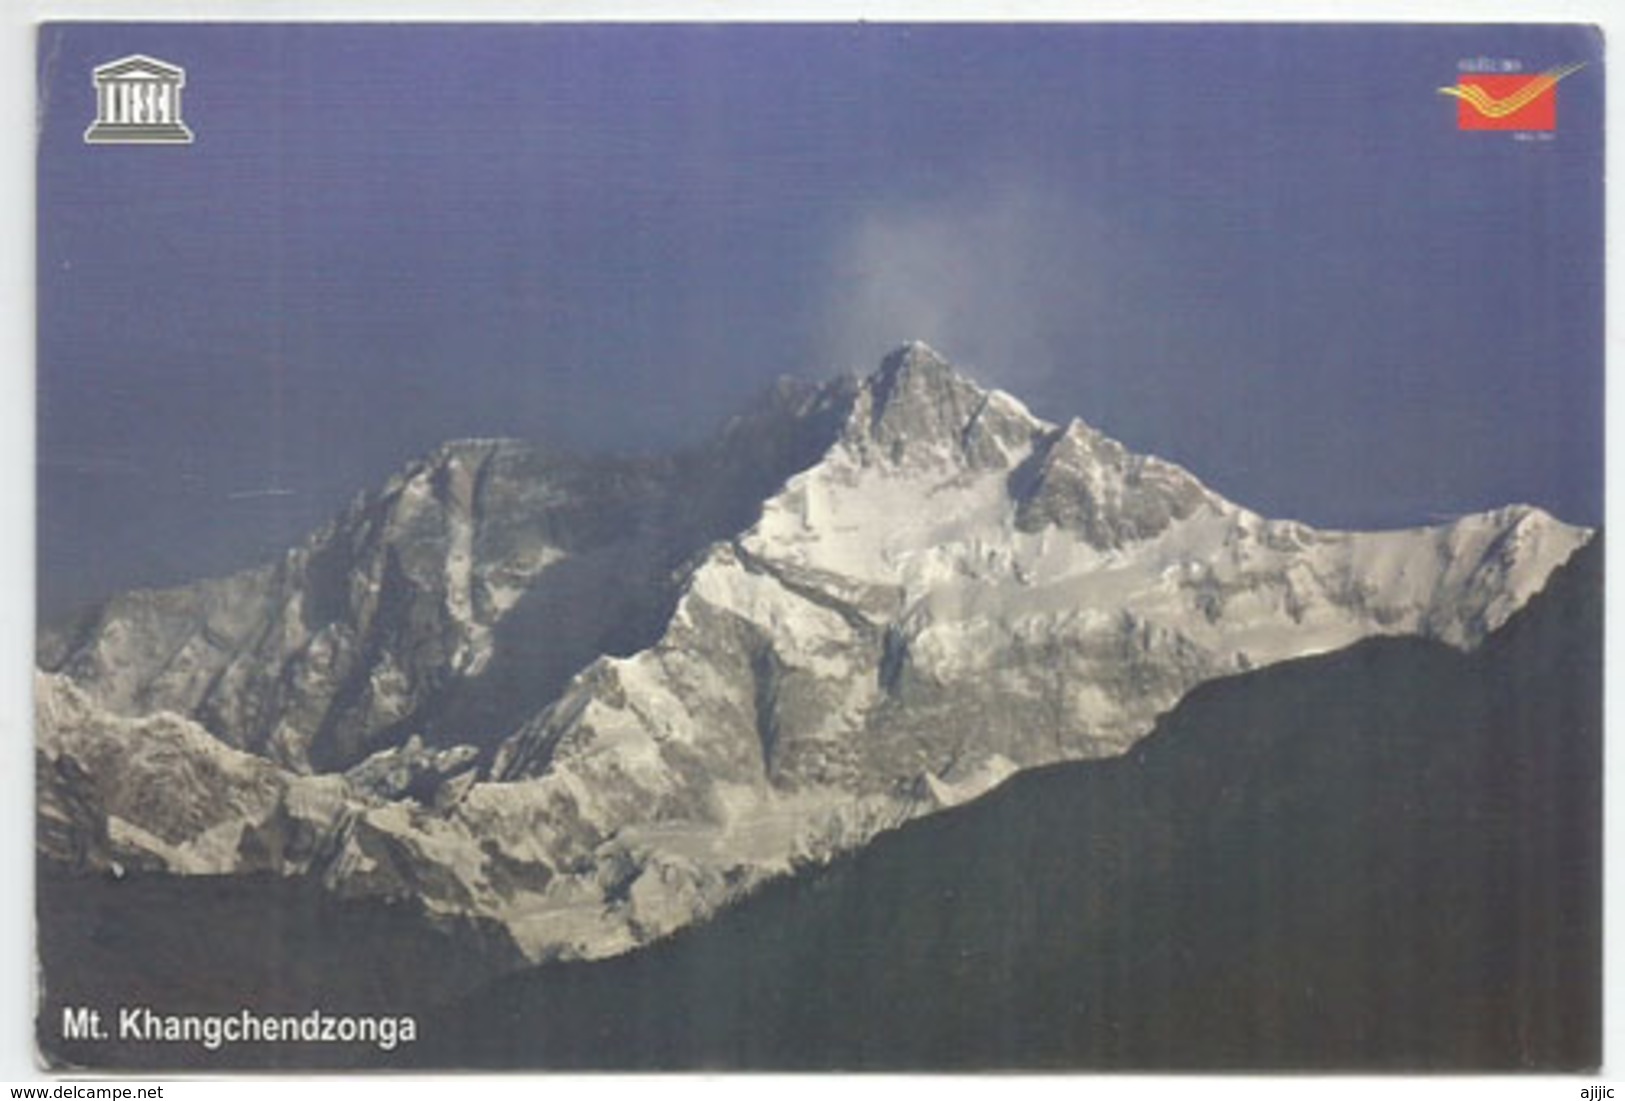 Mt.Kangchenjunga,8586 M, Third Highest Mountain In The World, Postcard Addressed To ANDORRA,with Arrival Postmark - Mountaineering, Alpinism